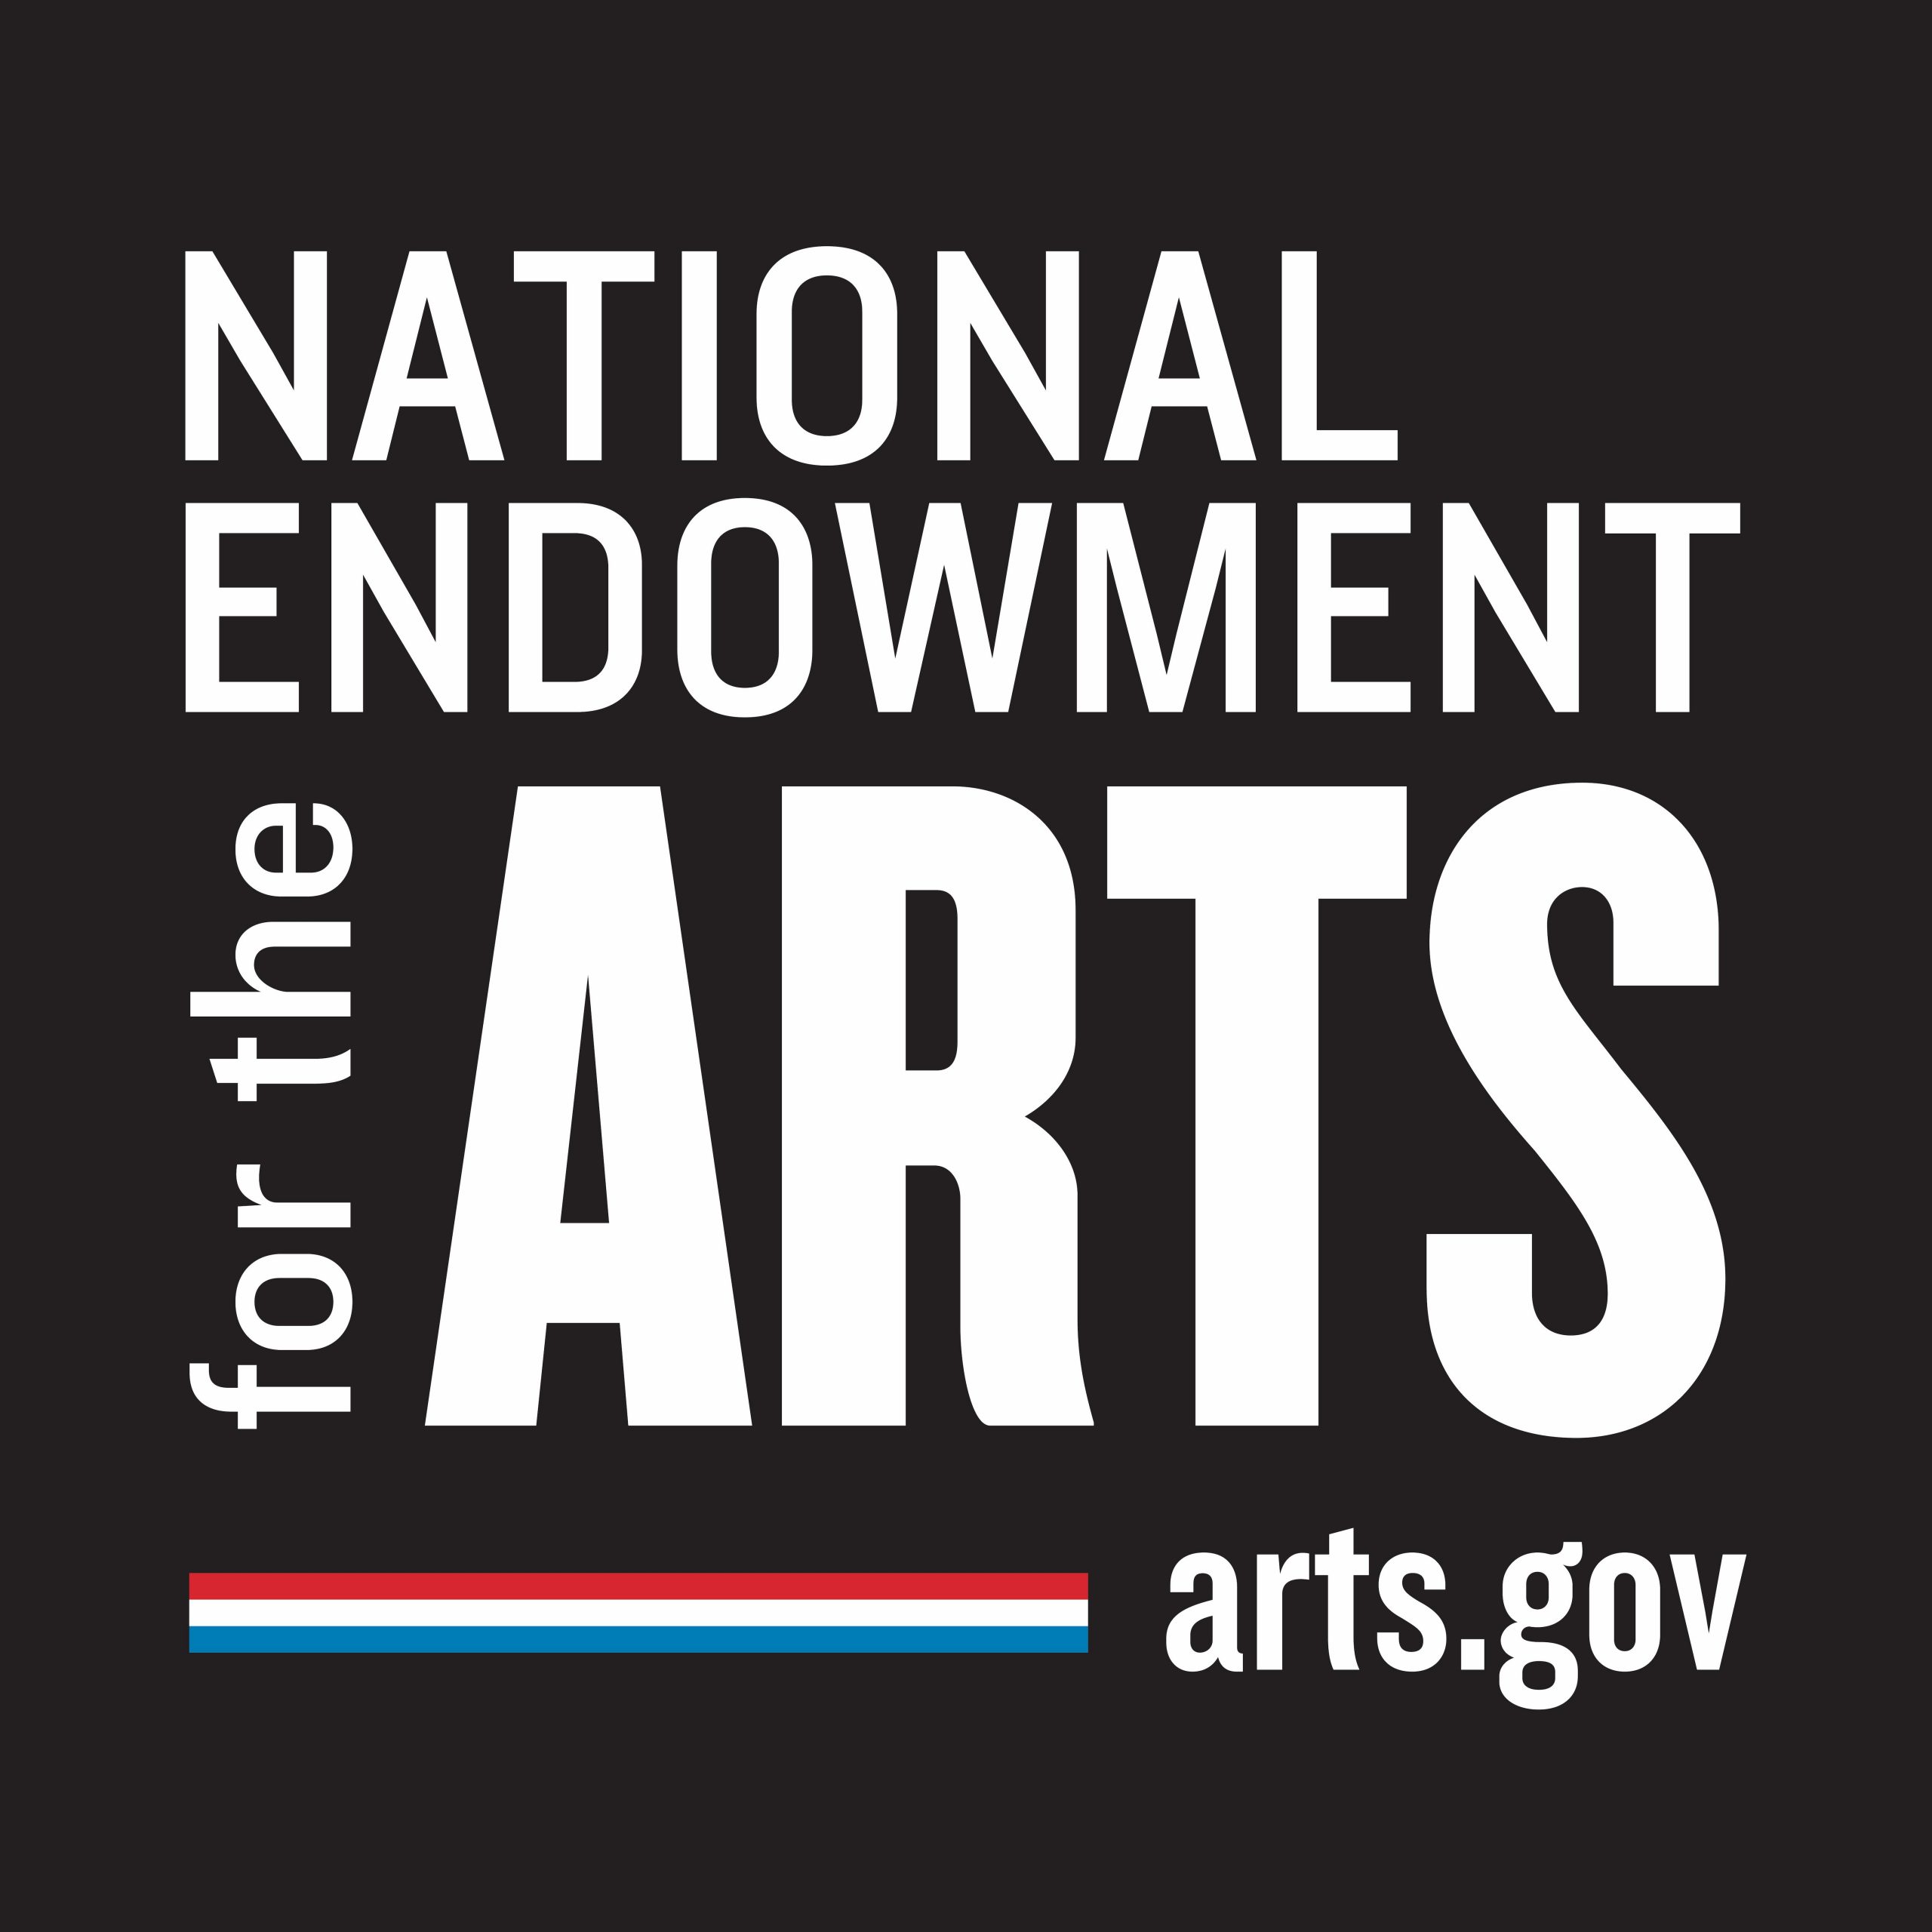 National Endowment for the Arts logo - Links to website